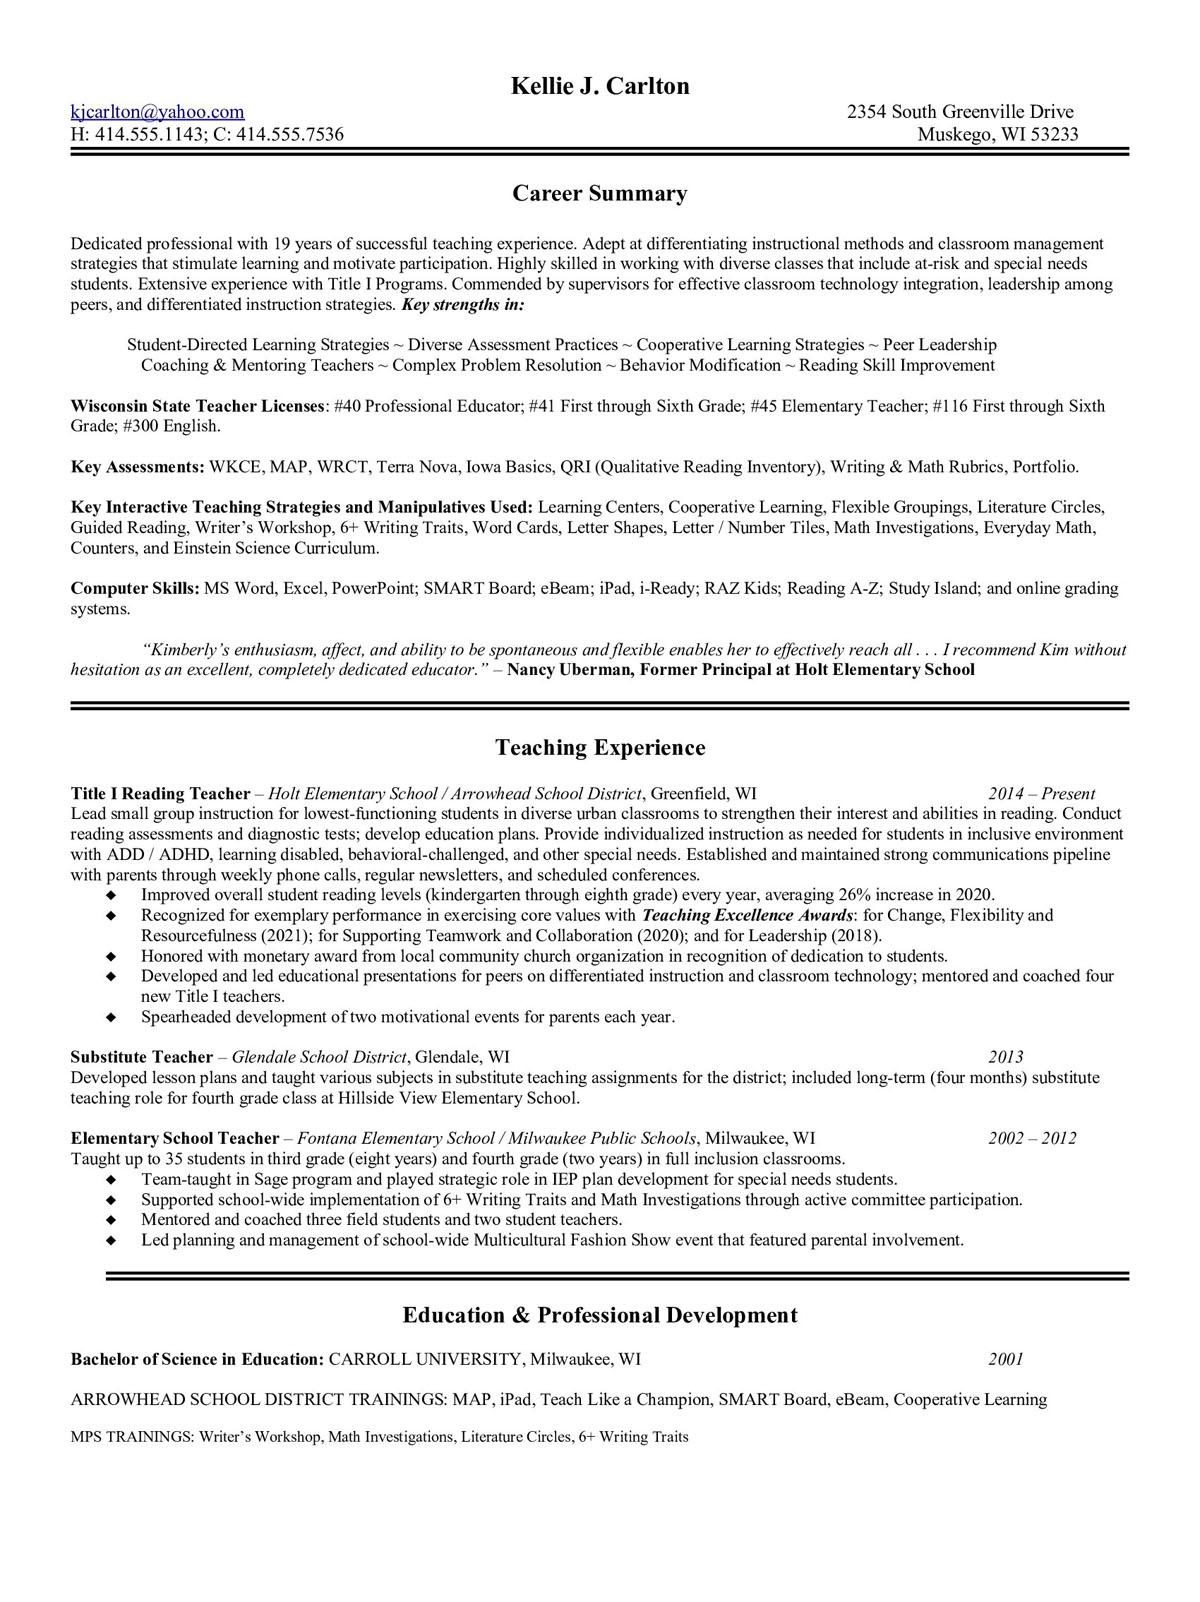 Sample resume: Elementary Education, High Experience, Combination